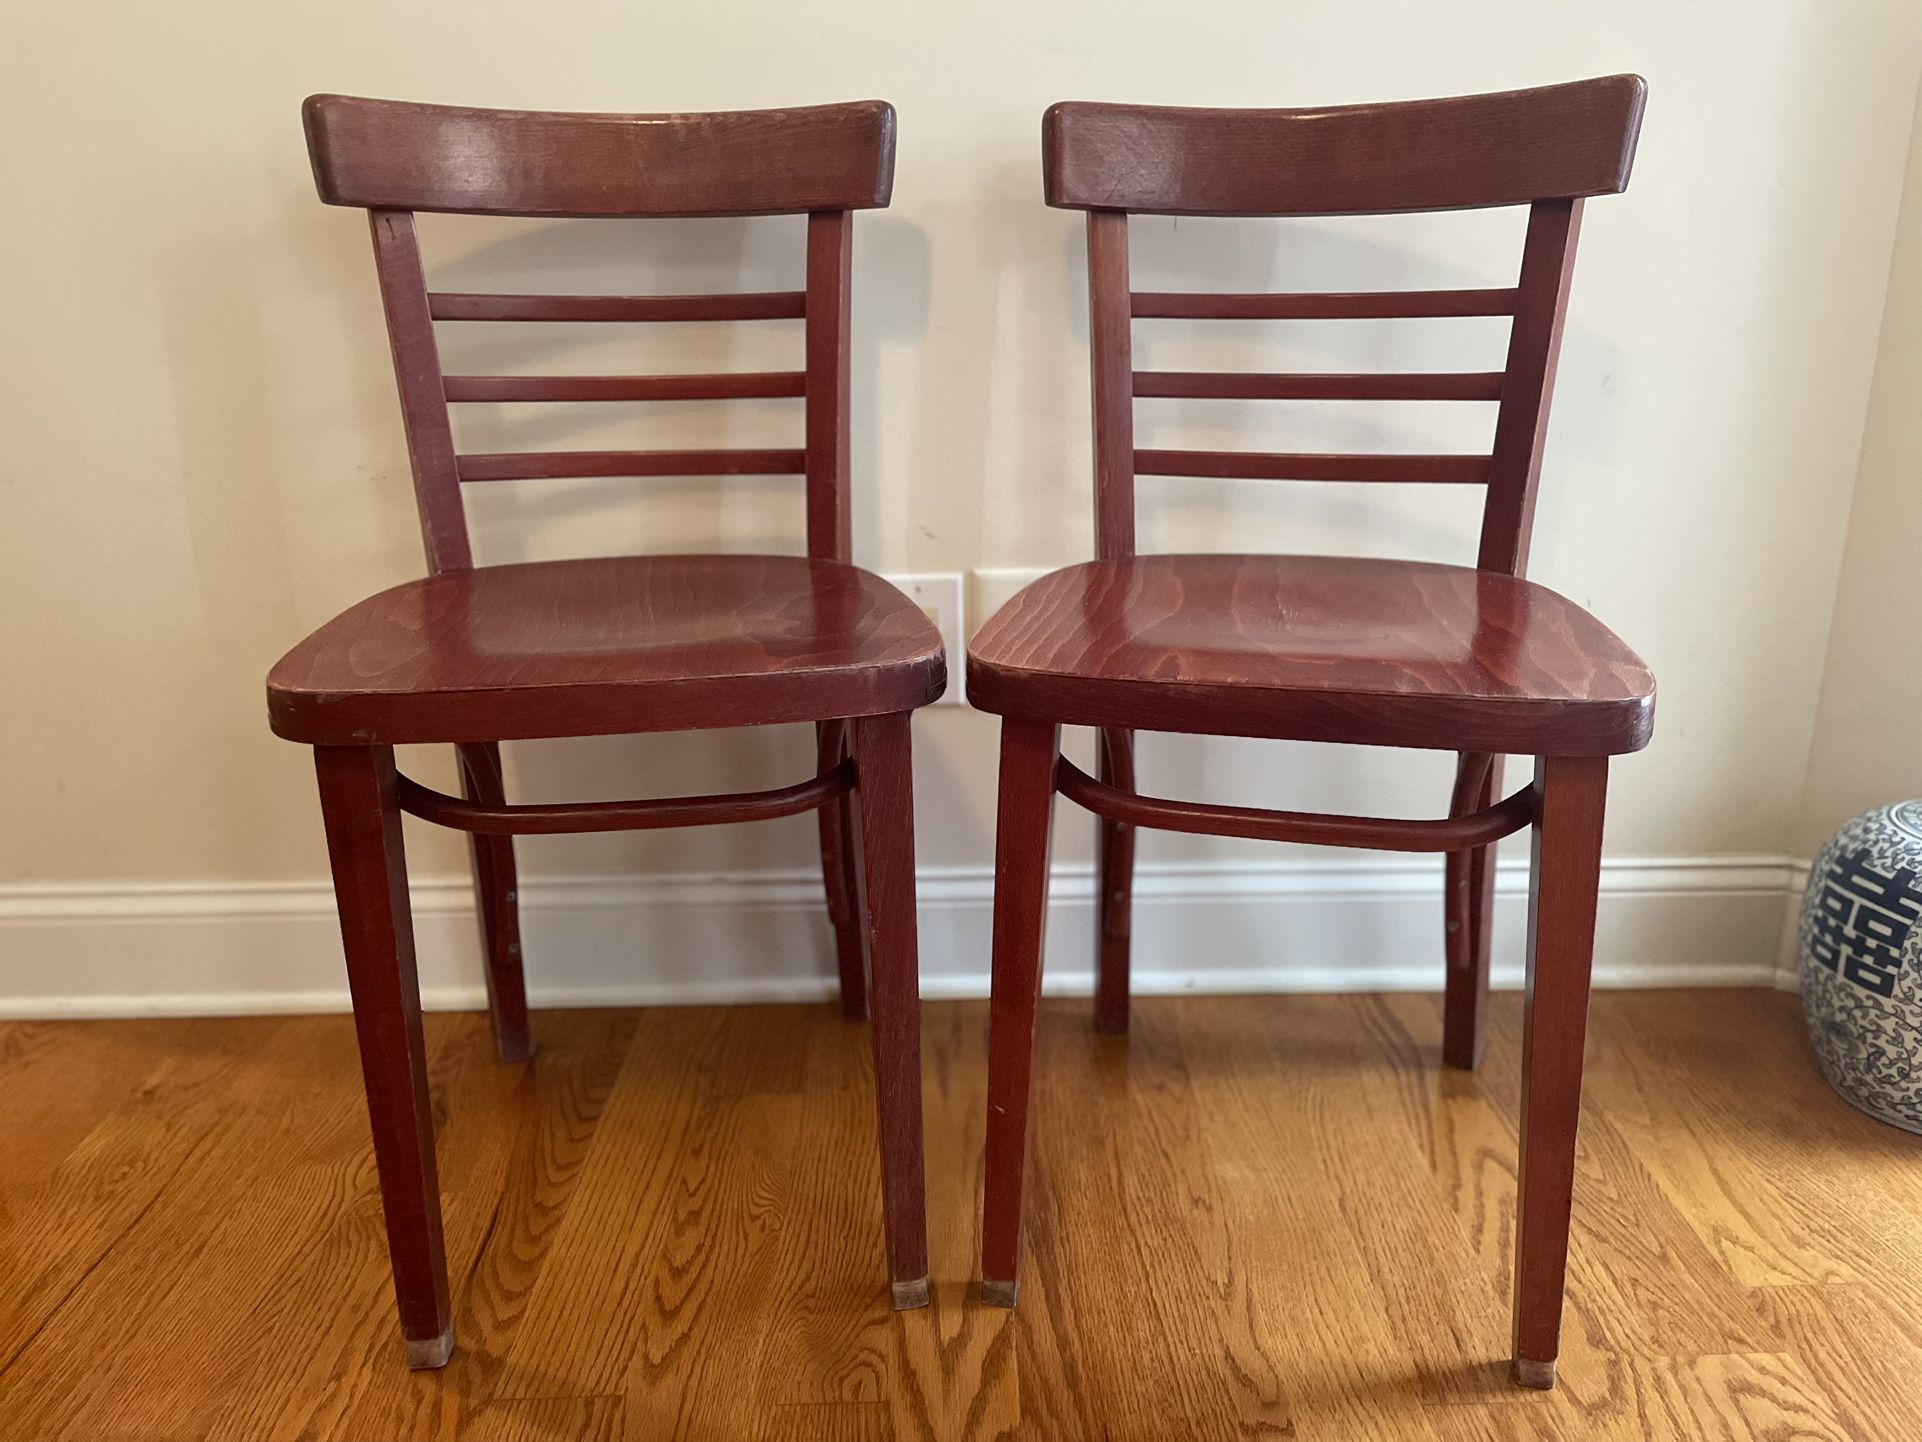 Mahogany Wooden Ladder Back Chairs - Set of 6